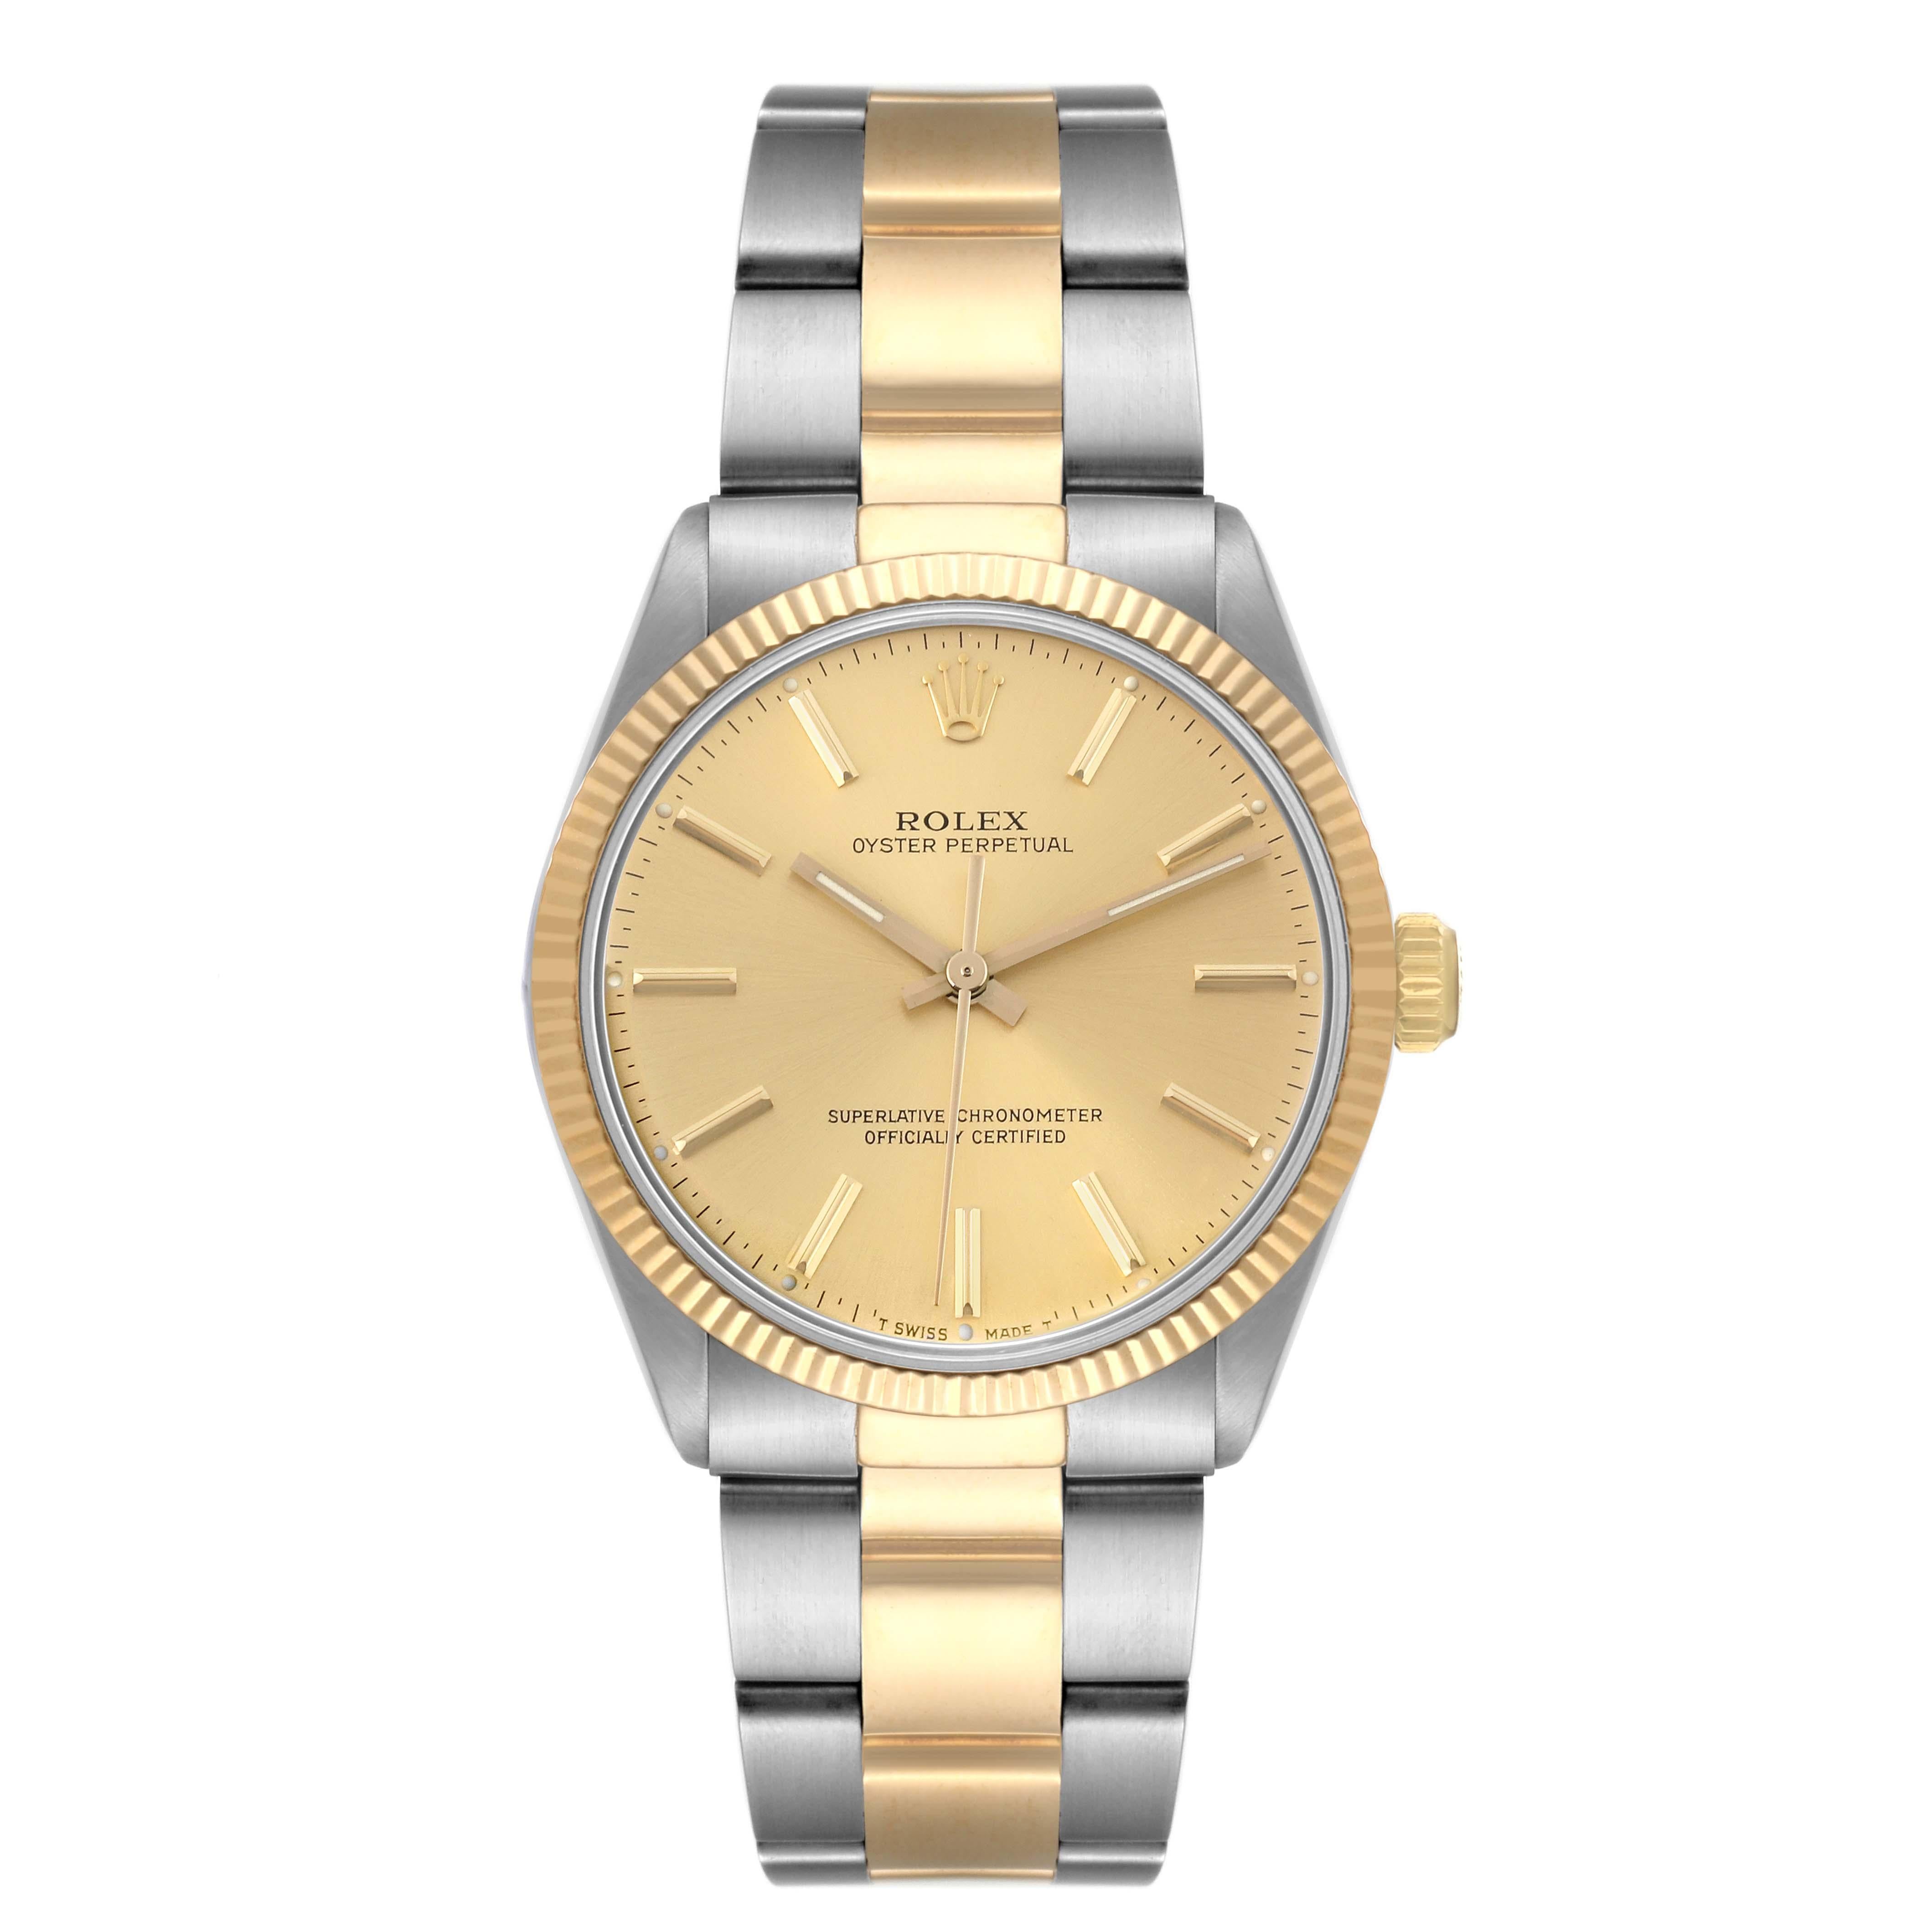 Rolex Oyster Perpetual Steel Yellow Gold Vintage Mens Watch 1005. Officially certified chronometer self-winding movement. Stainless steel and 18K yellow gold oyster case 34.0 mm in diameter.  Rolex logo on a crown. 18K yellow gold fluted bezel.